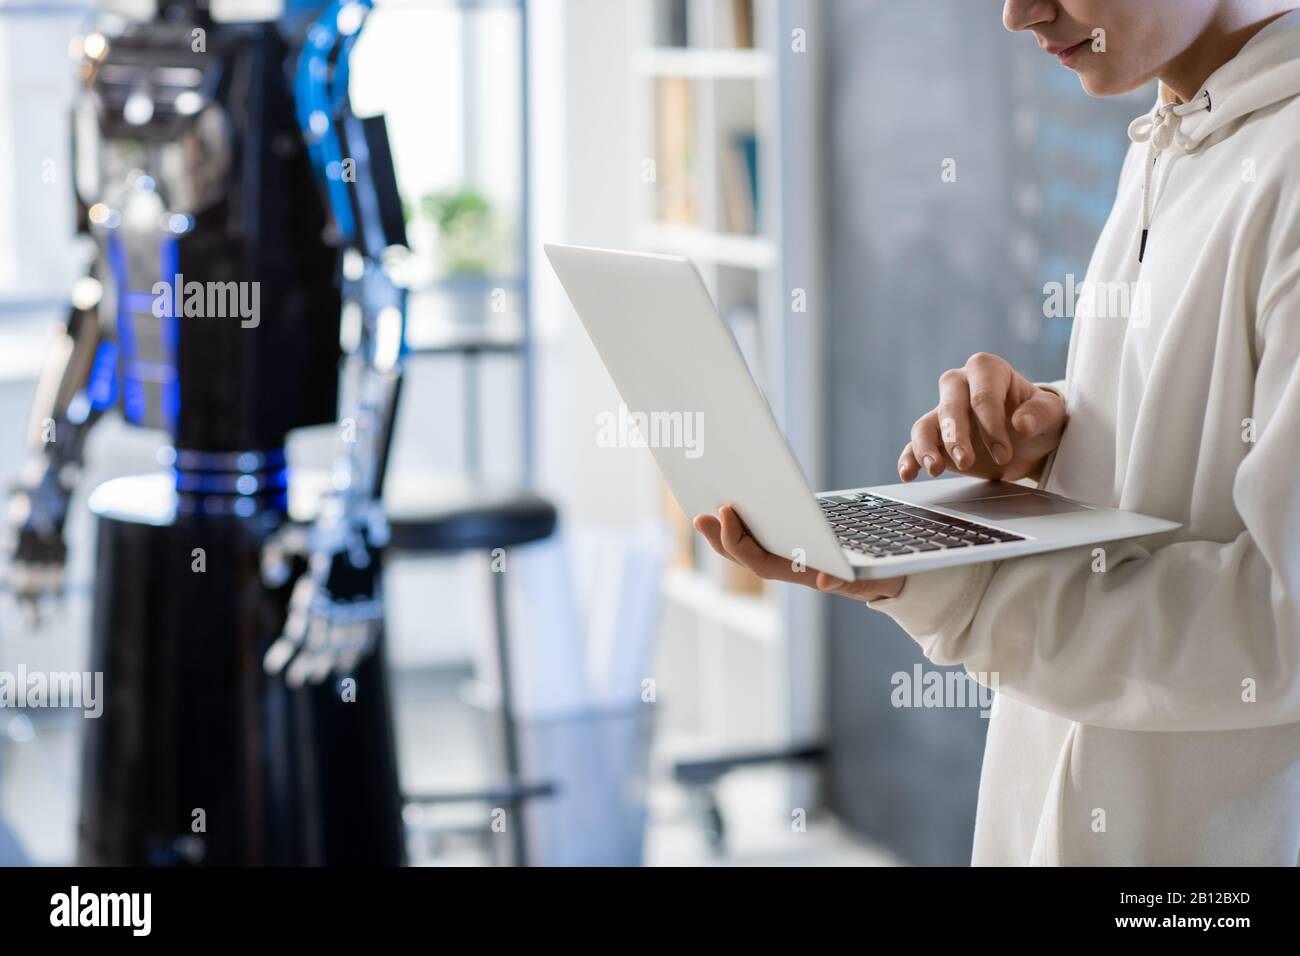 Young man in hoodie using laptop during presentation or testing automation robot Stock Photo